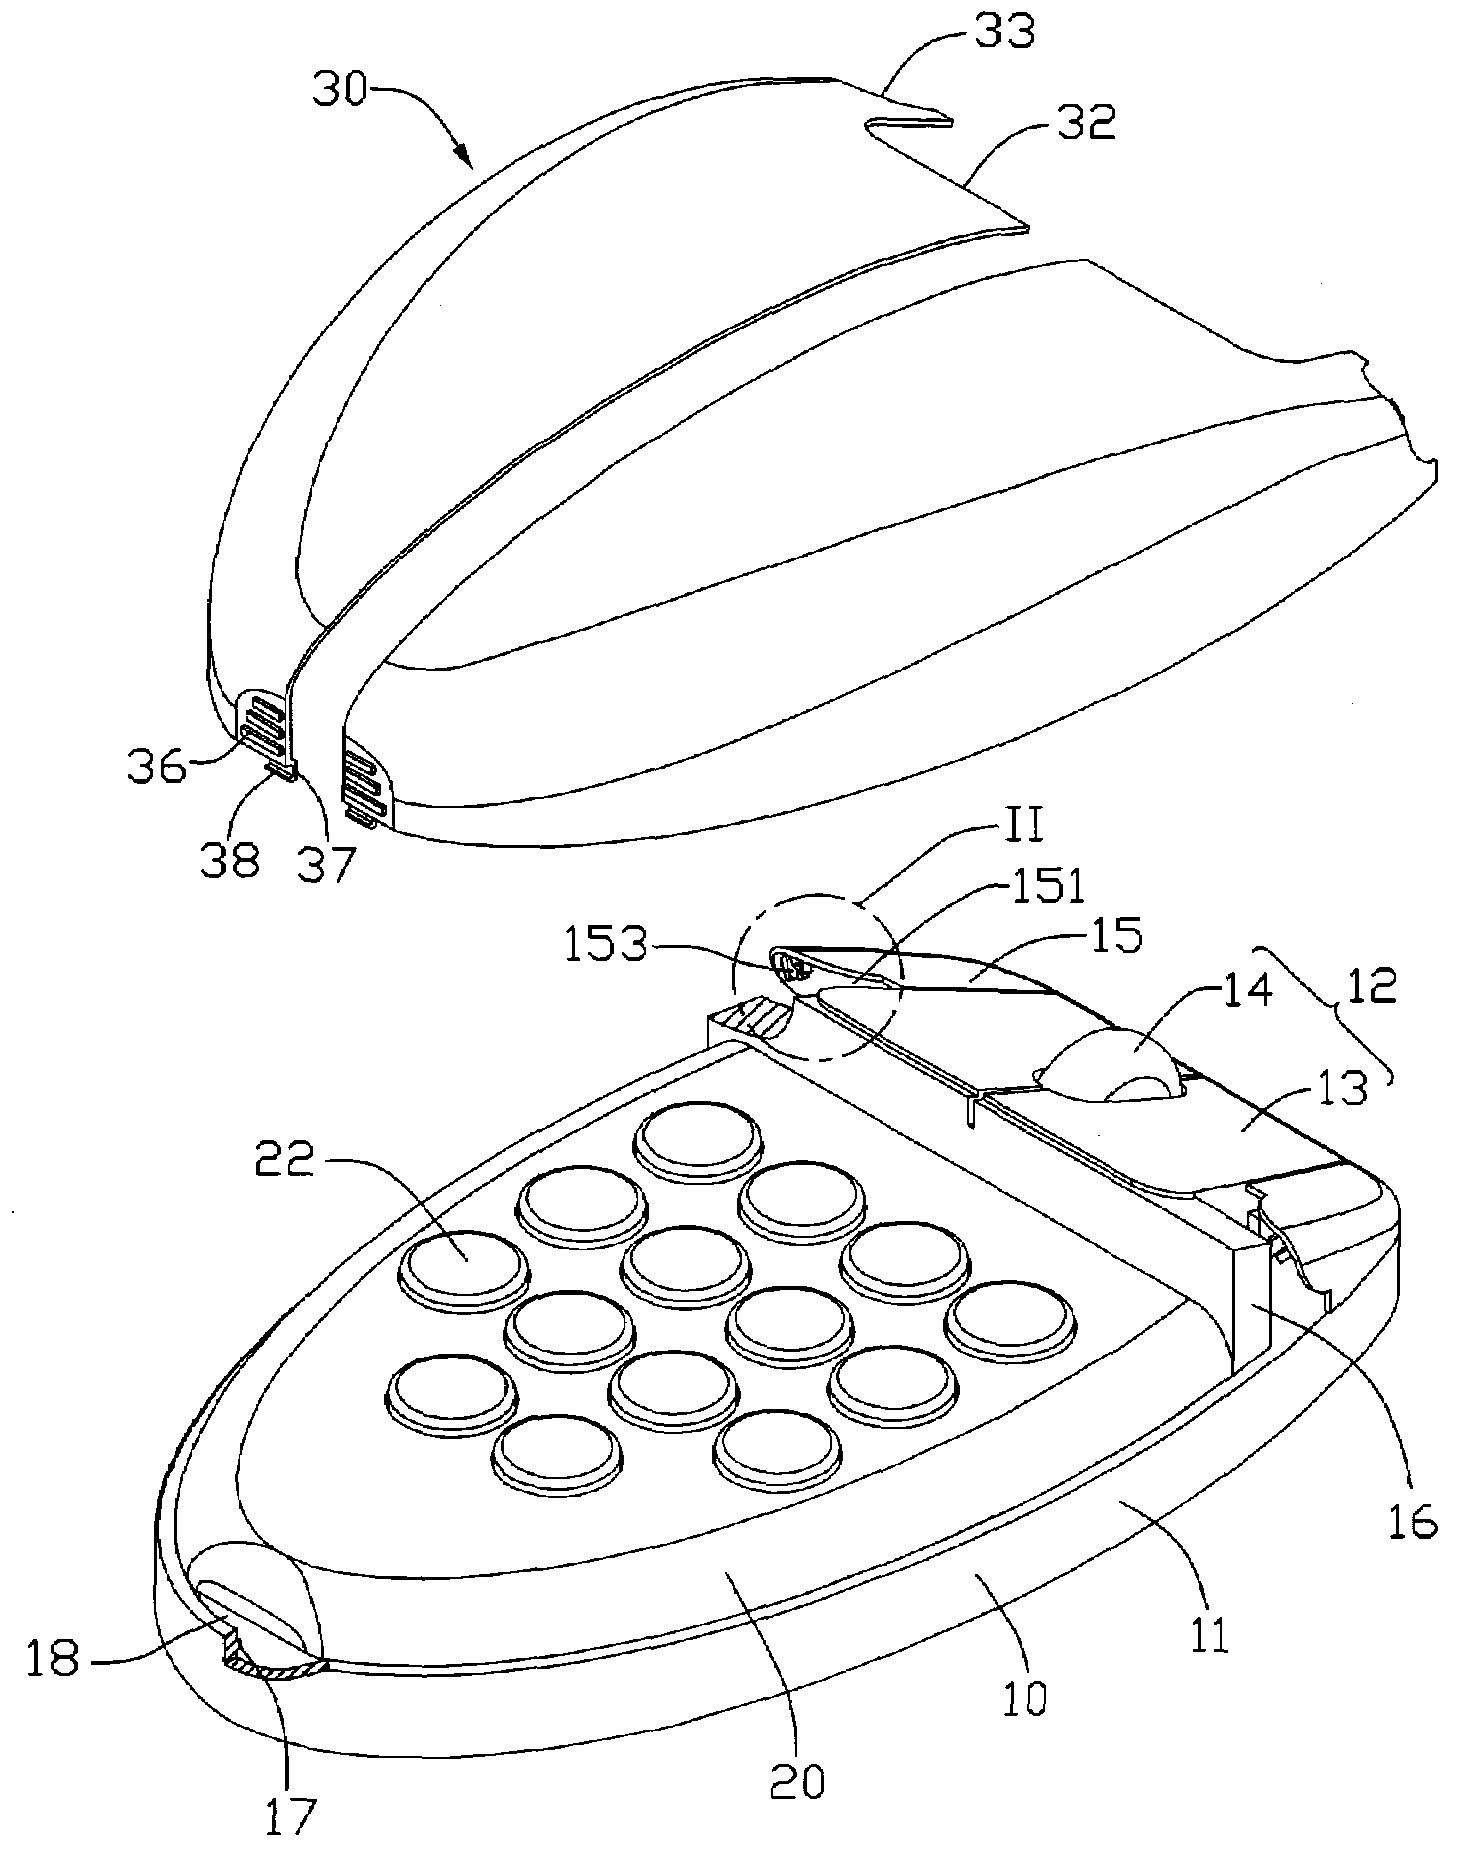 Input device for computer